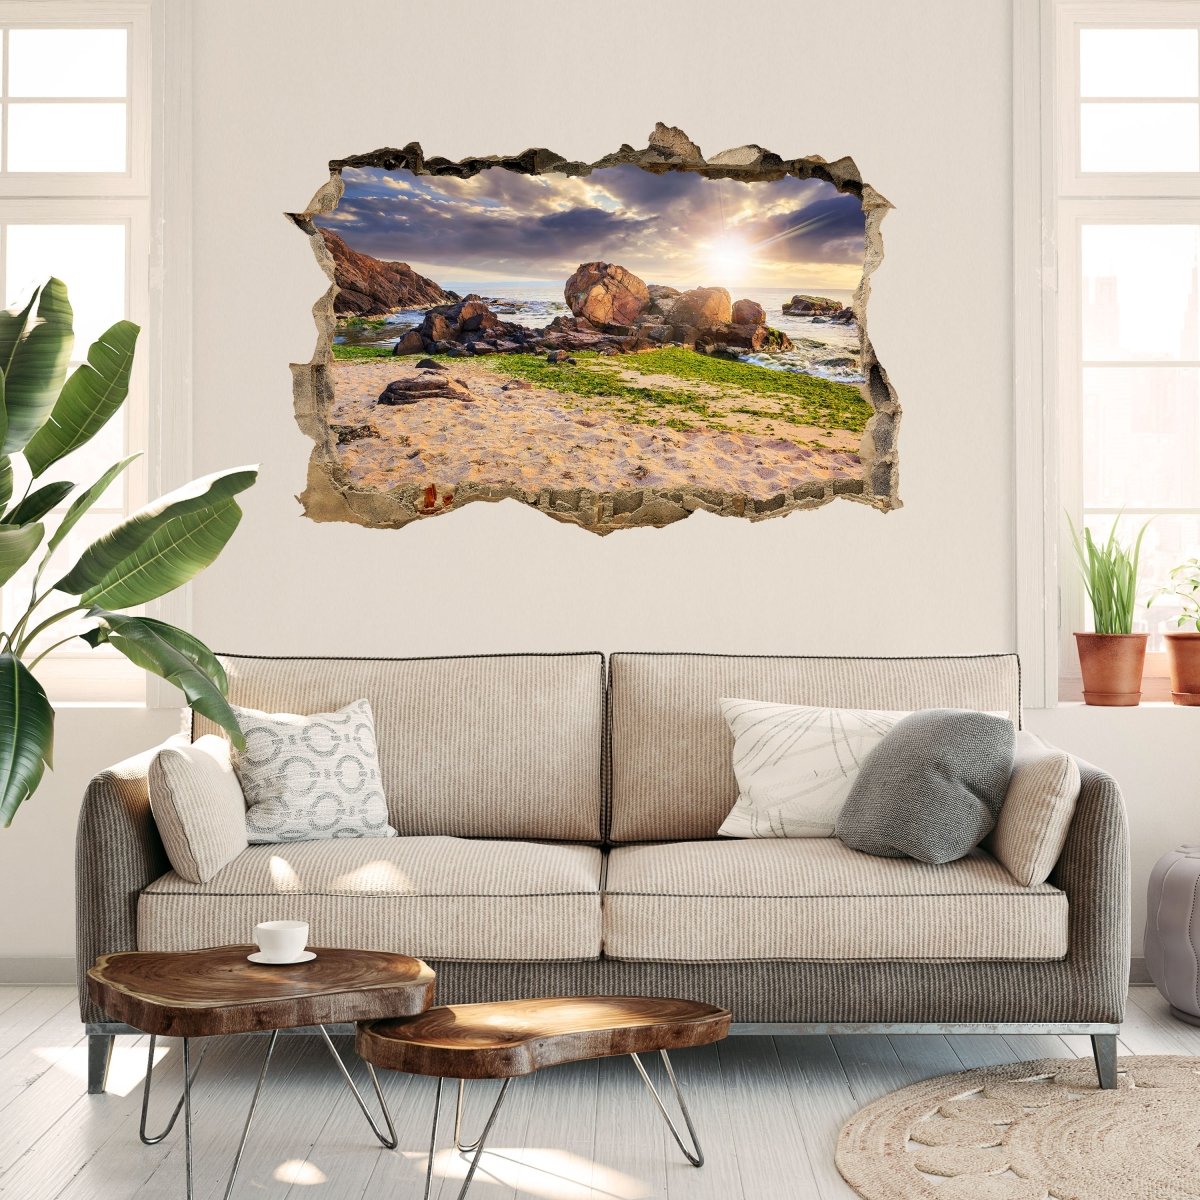 3D wall sticker coast at sunset - Wall Decal M0044